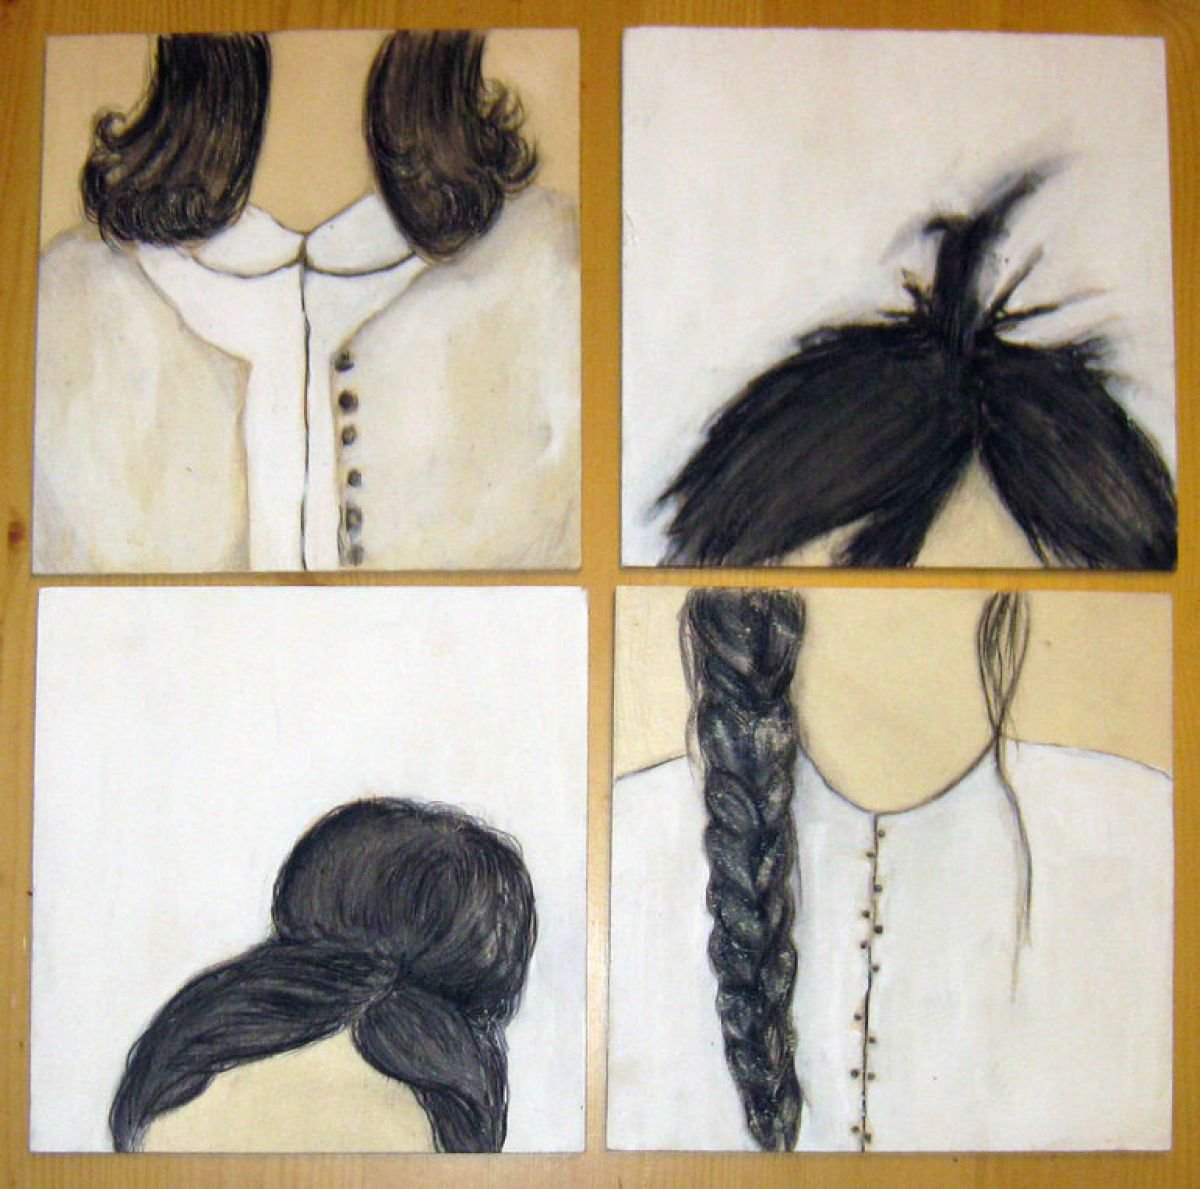 portrait of Hair by Marilina Marchica